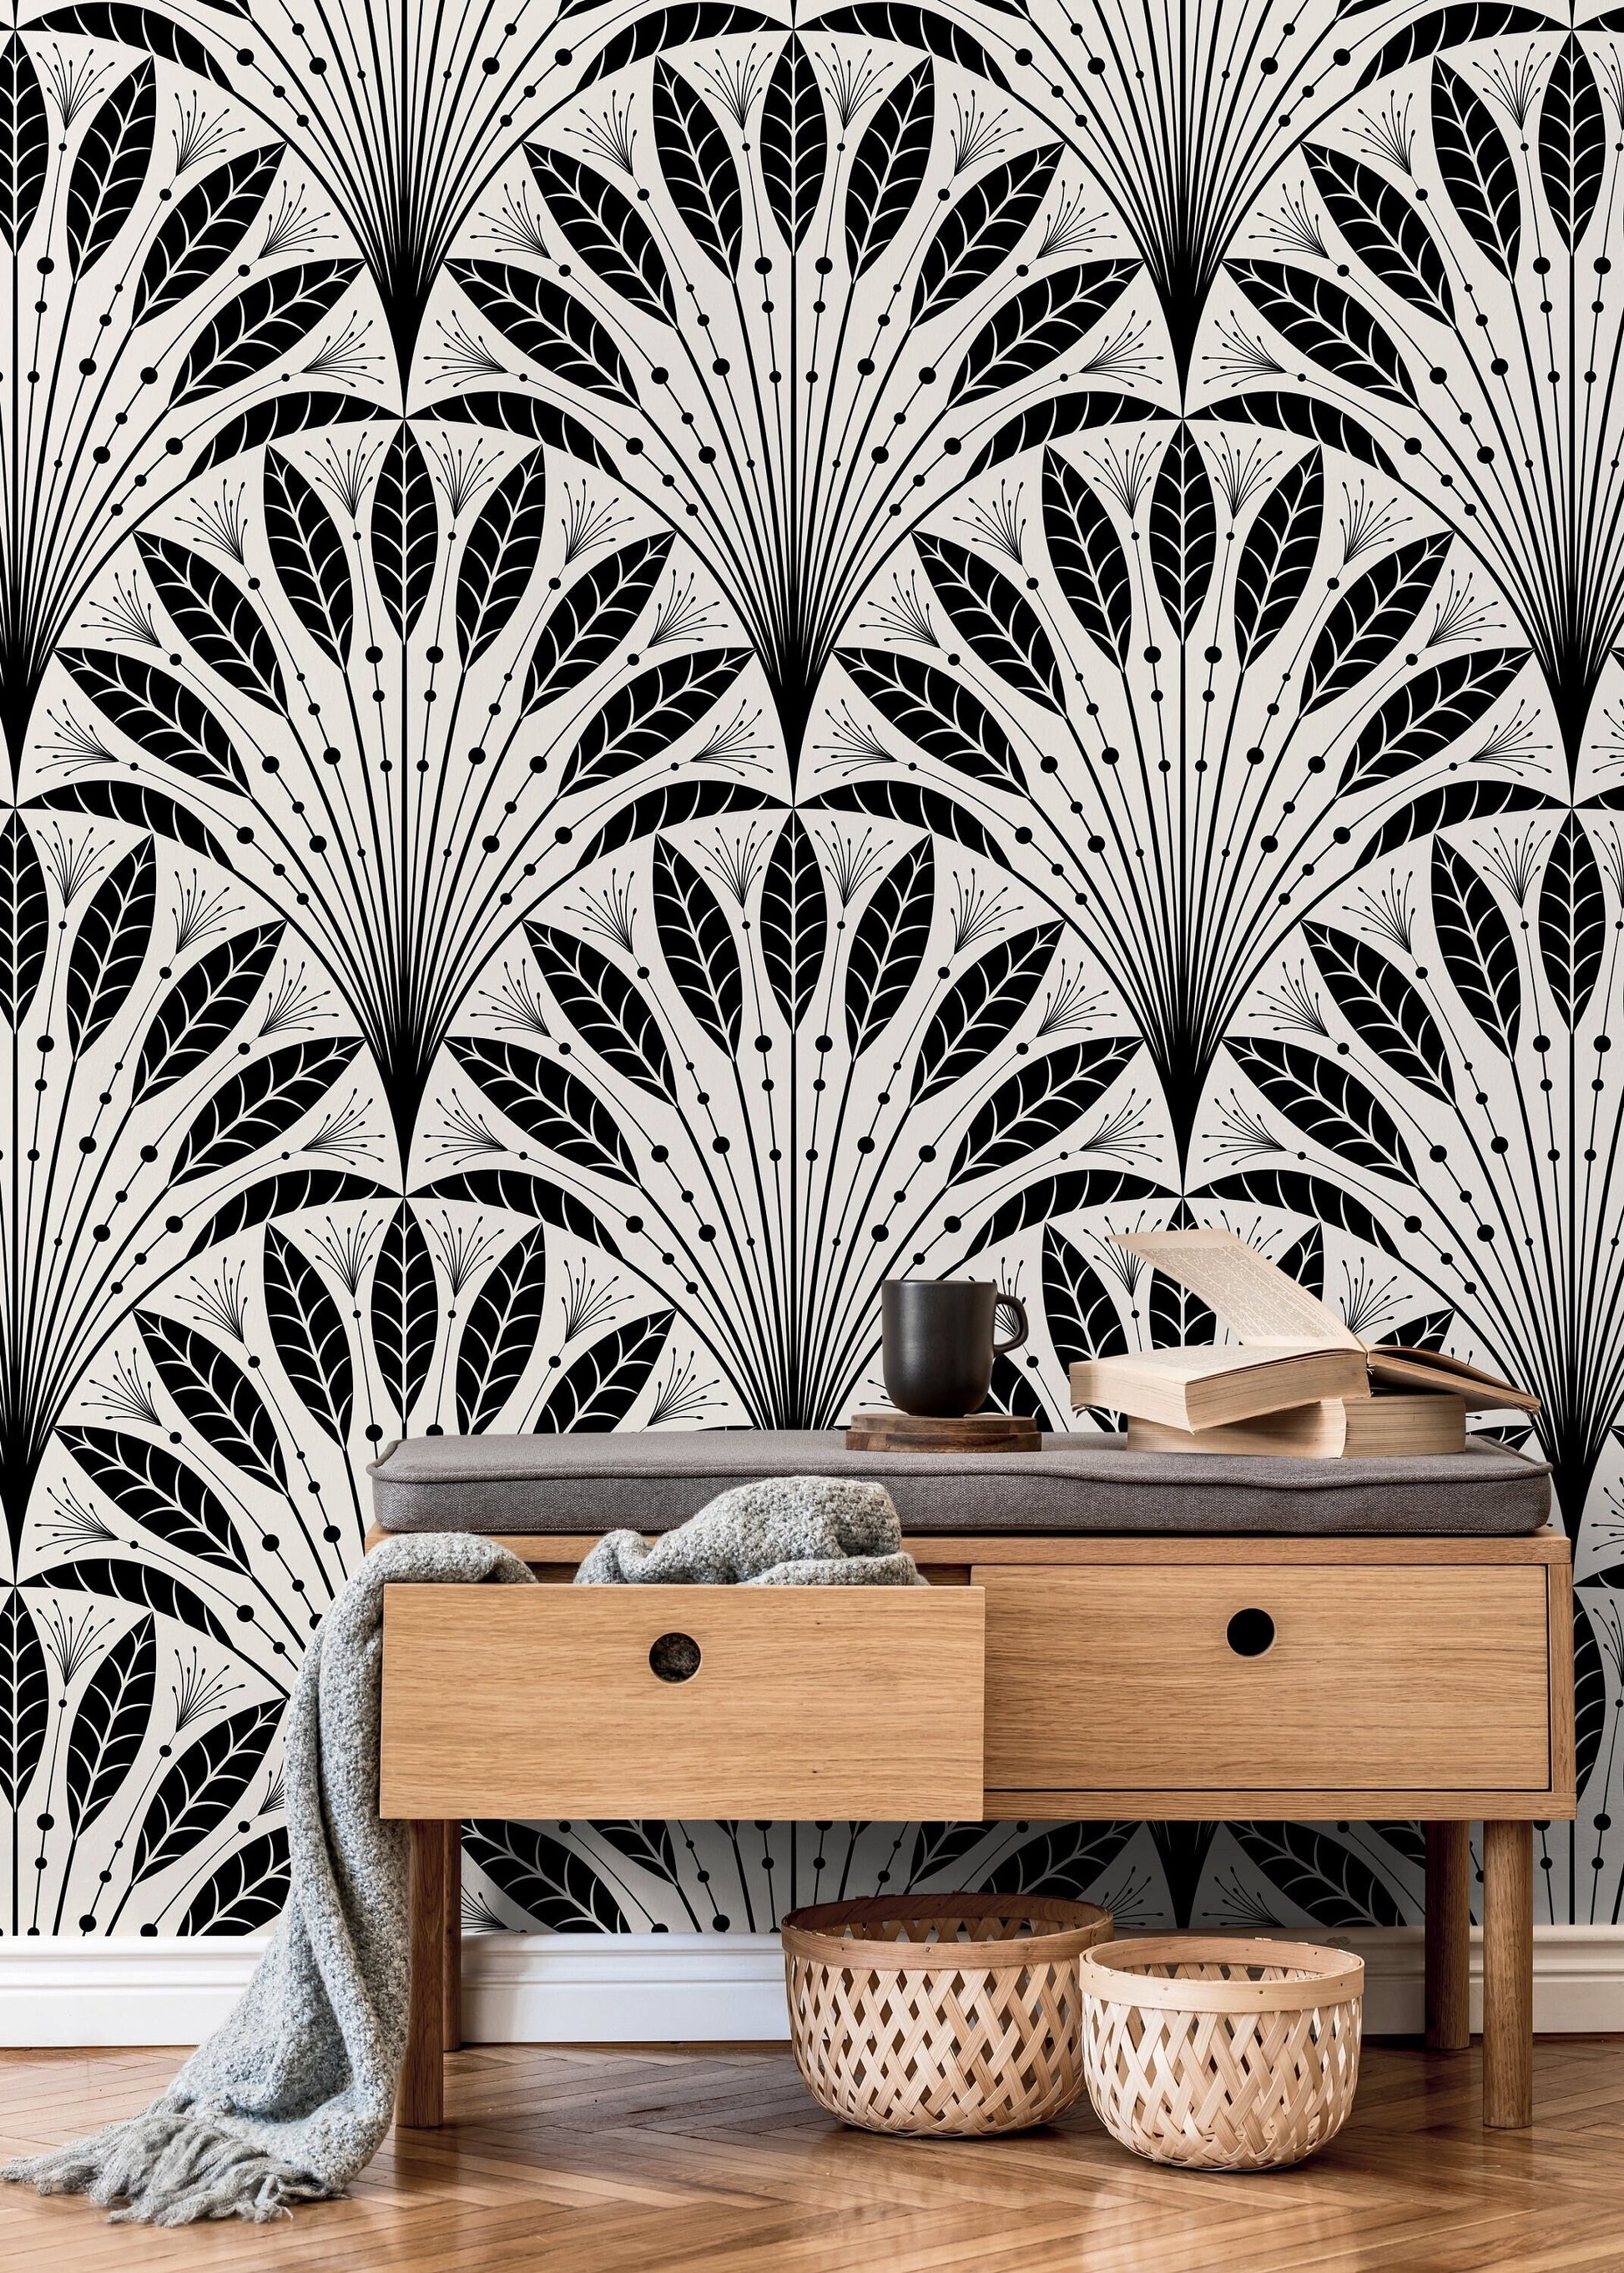 Black and Beige Boho Feathers Wallpaper / Peel and Stick Wallpaper Removable Wallpaper Home Decor Wall Art Wall Decor Room Decor - C814